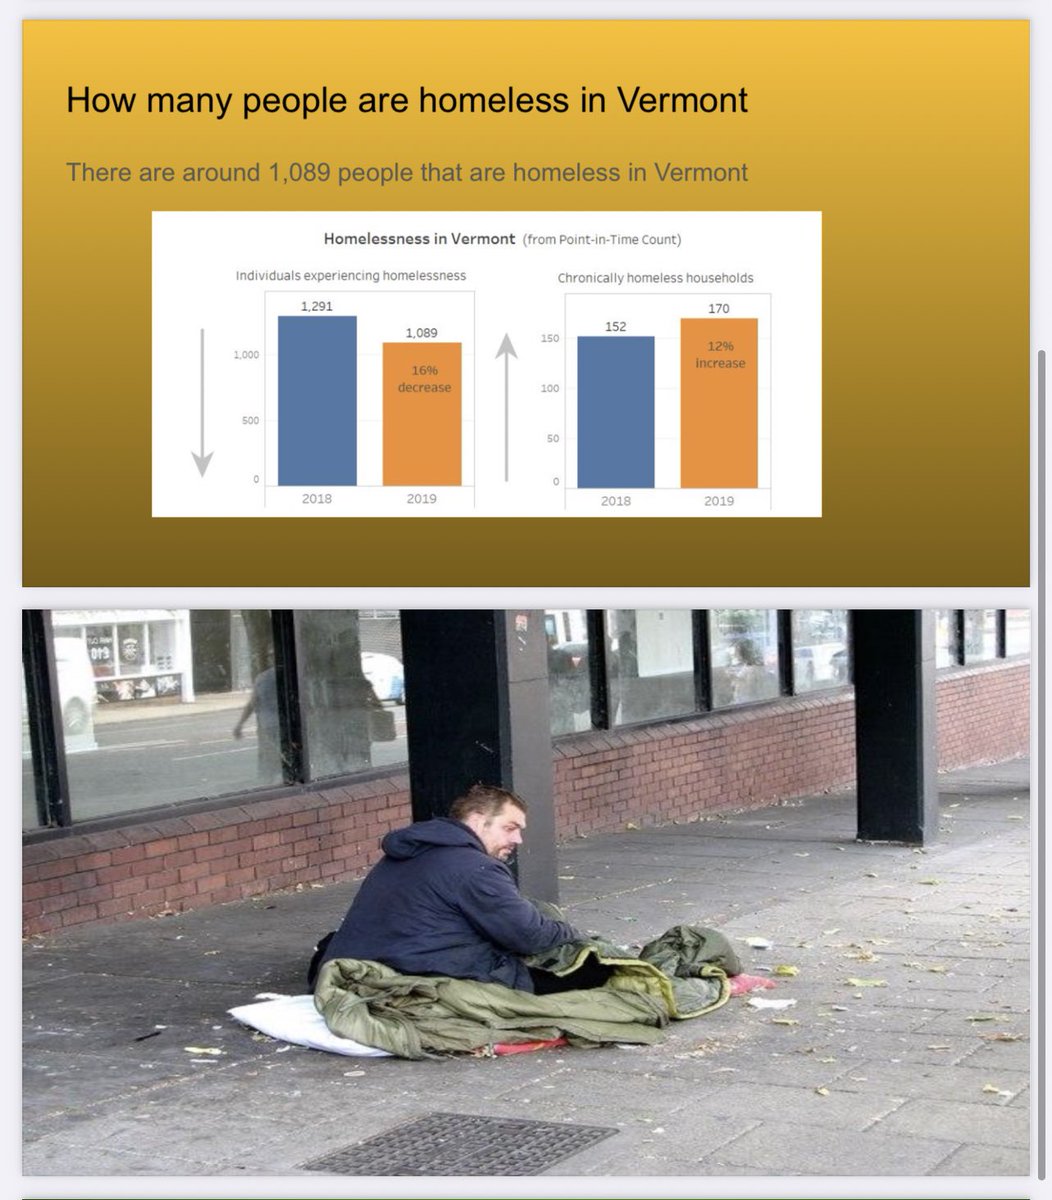 This student created a slideshow about homelessness in Vermont to raise awareness.  #socialjusticeexploration  #mtsdvt  #sschat  #vted